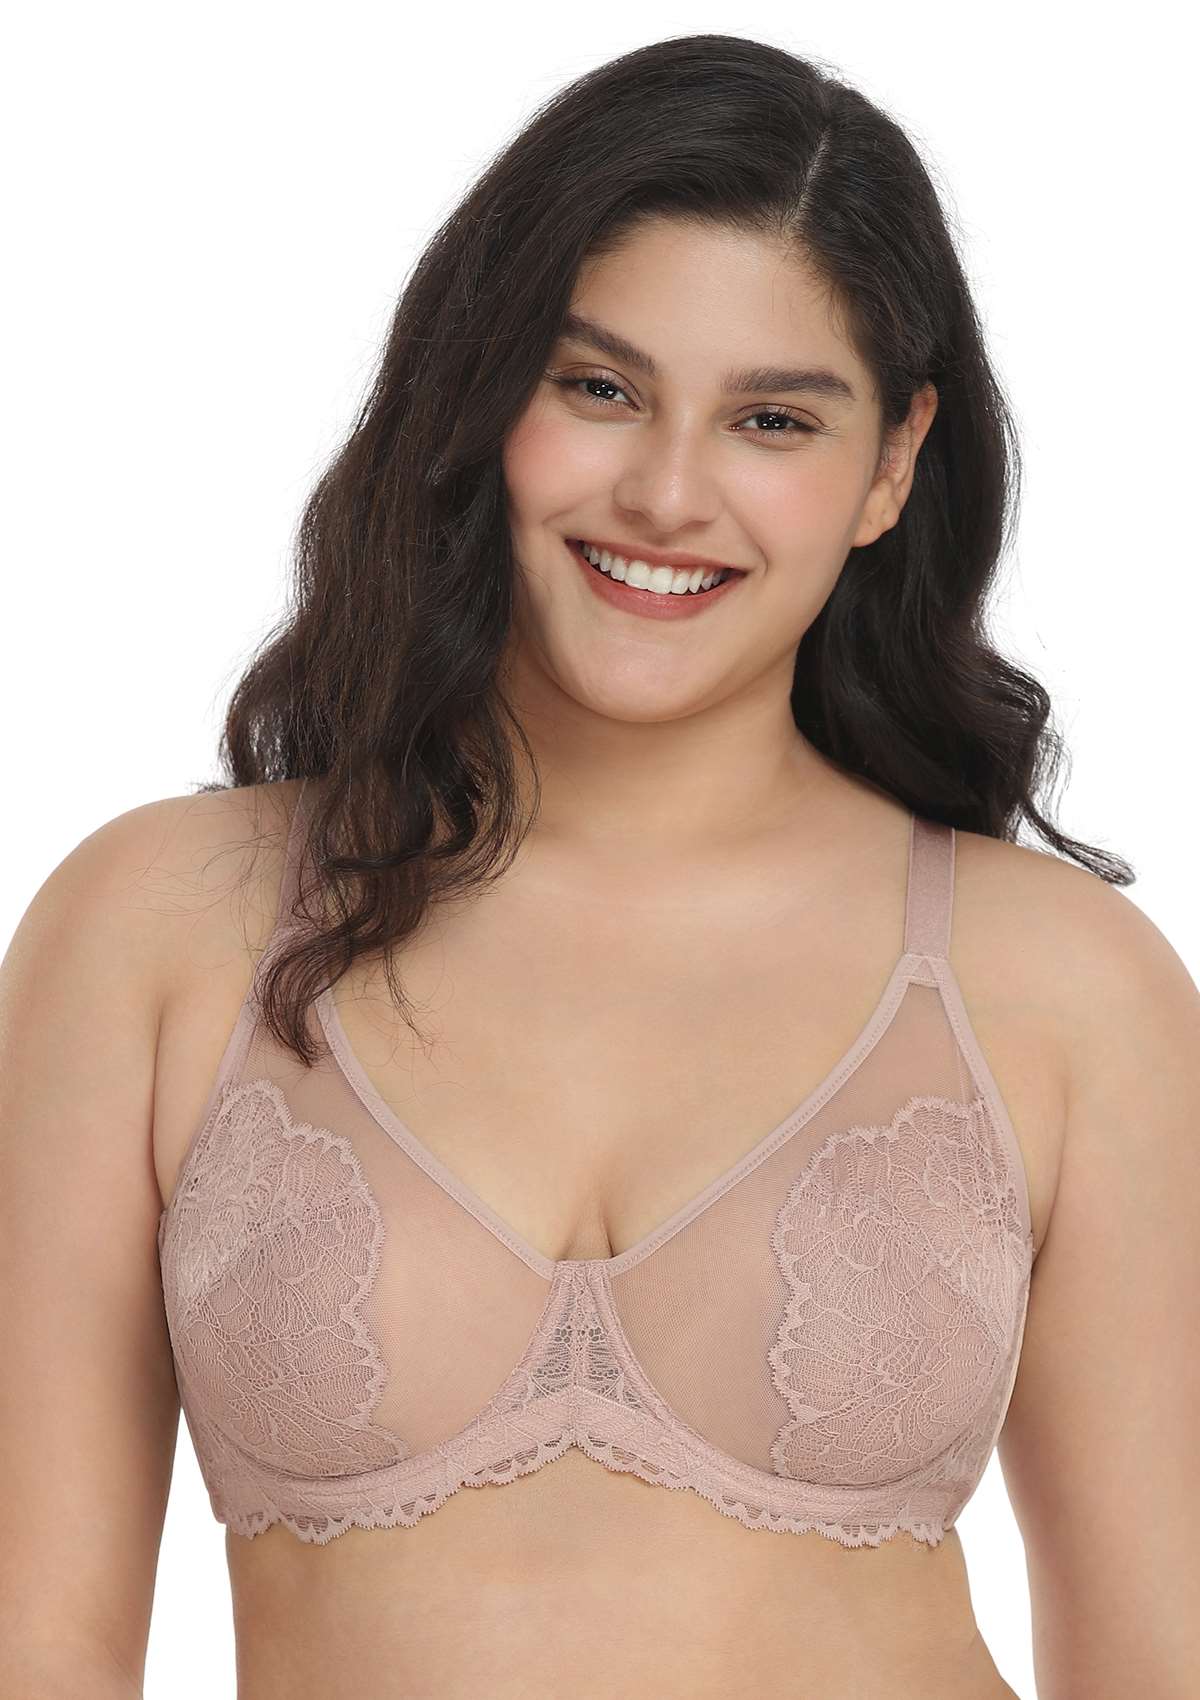 HSIA Blossom Lace Bra And Panties Set: Best Bra For Large Busts - Dark Pink / 36 / D